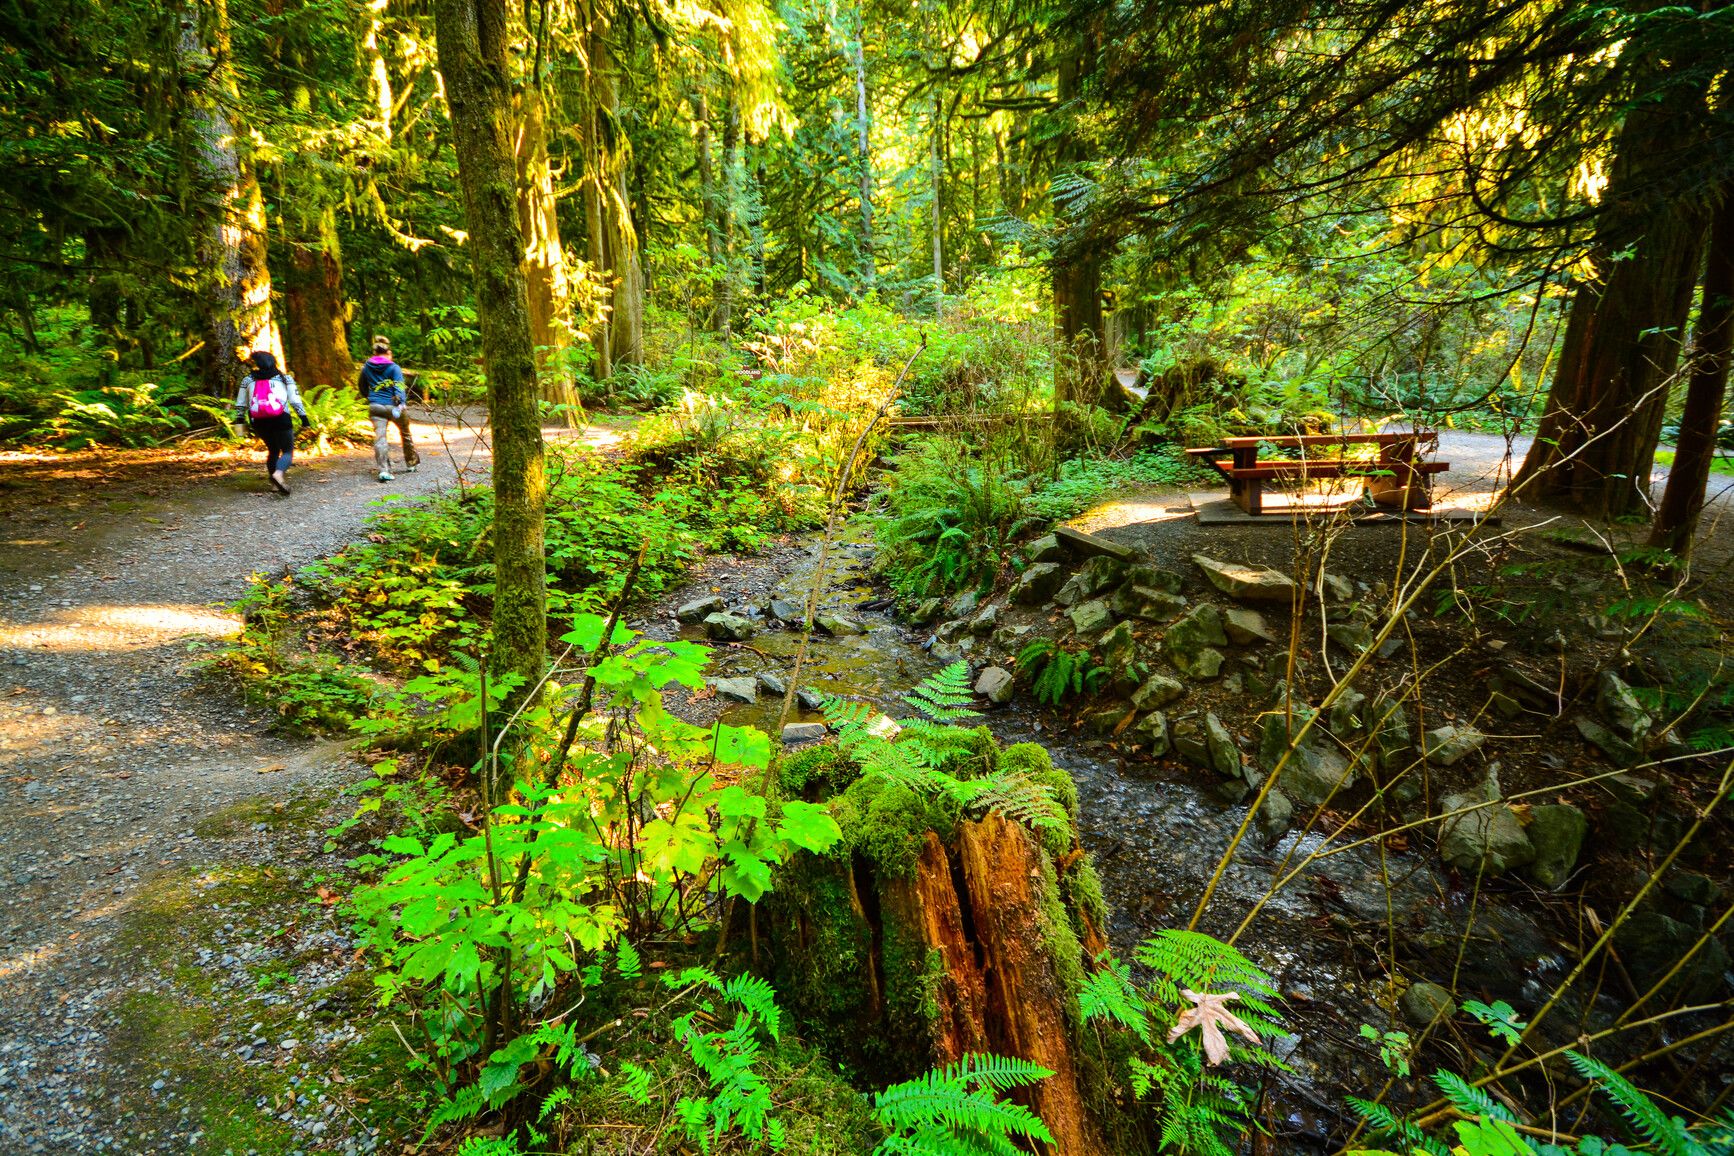 Bridal Veil Falls Park has wide, accessible trails and day-use picnic areas where you can relax and get lost in the soothing sound of a stream flowing through the forest.